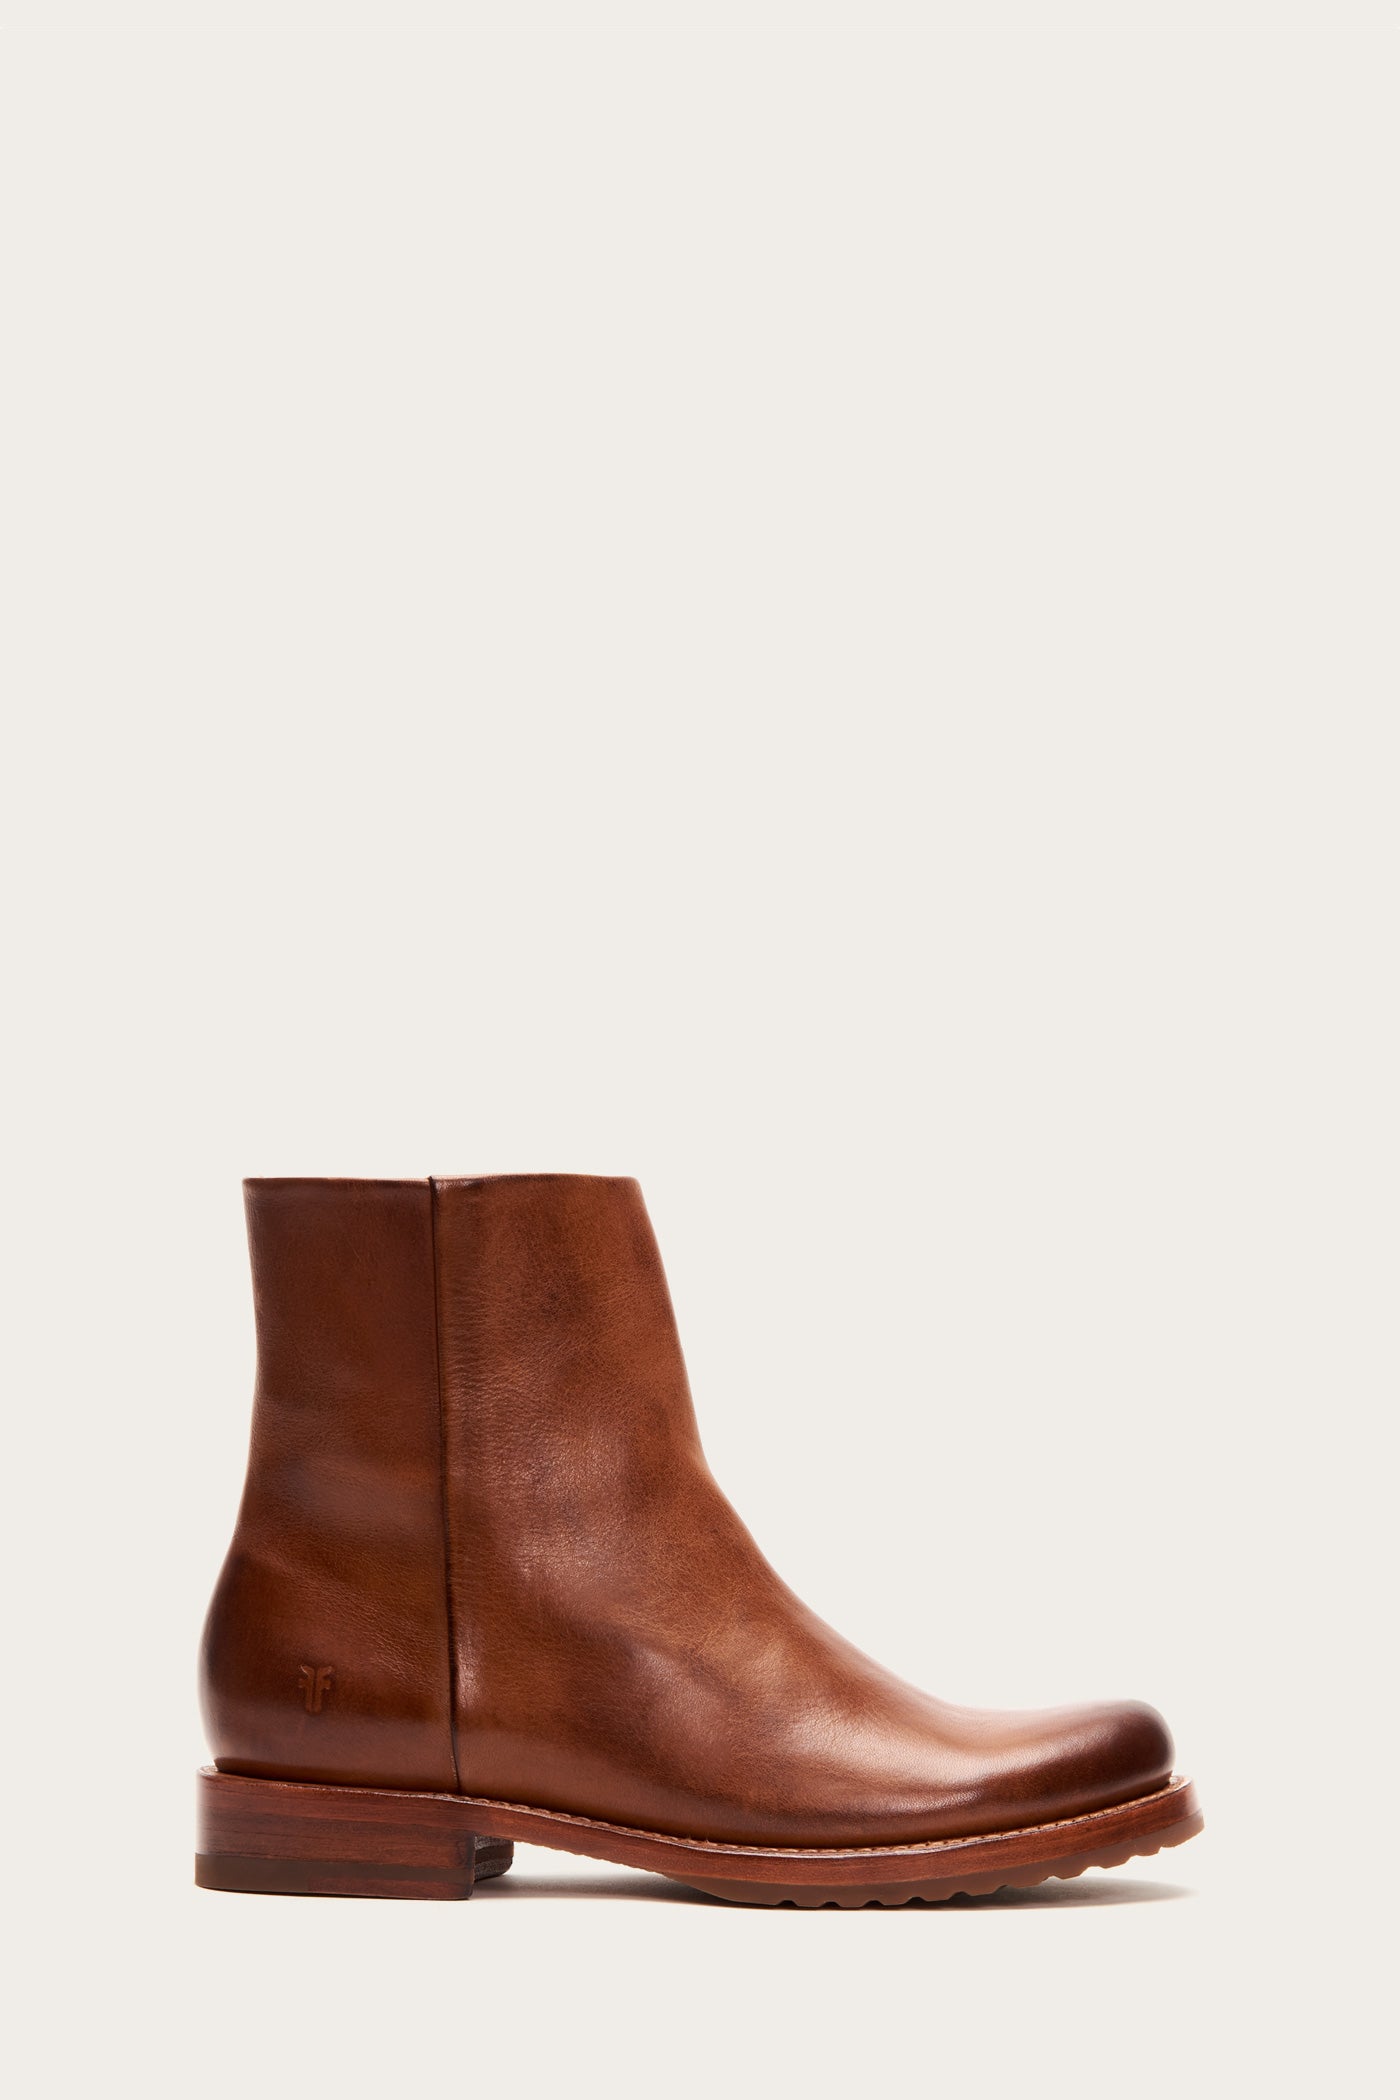 FRYE Boots, Sneakers, Shoes for Men and 